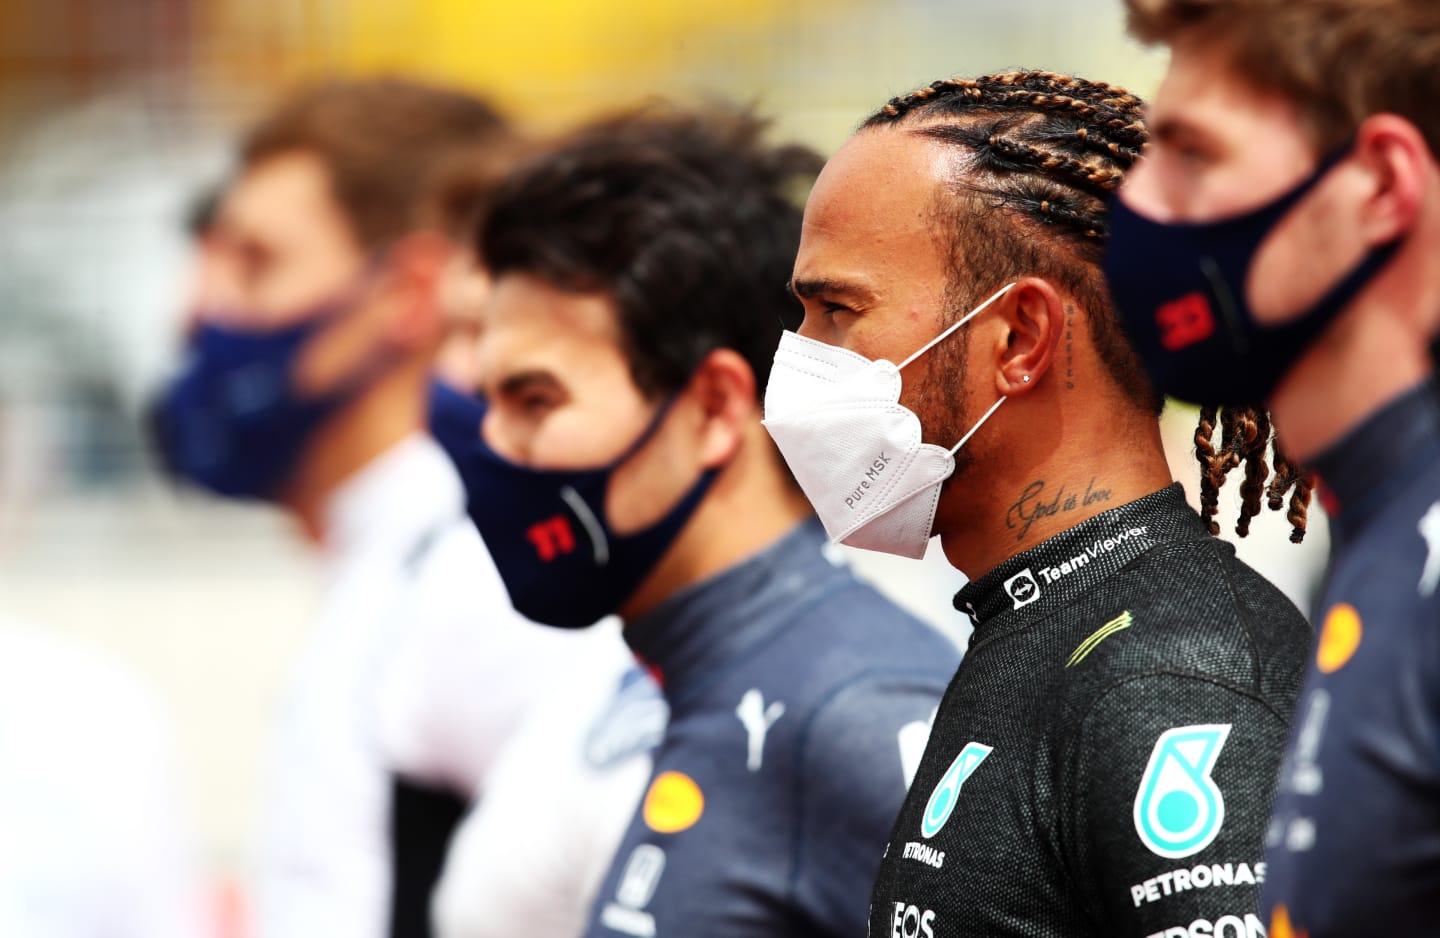 LE CASTELLET, FRANCE - JUNE 20: Lewis Hamilton of Great Britain and Mercedes GP looks on as he